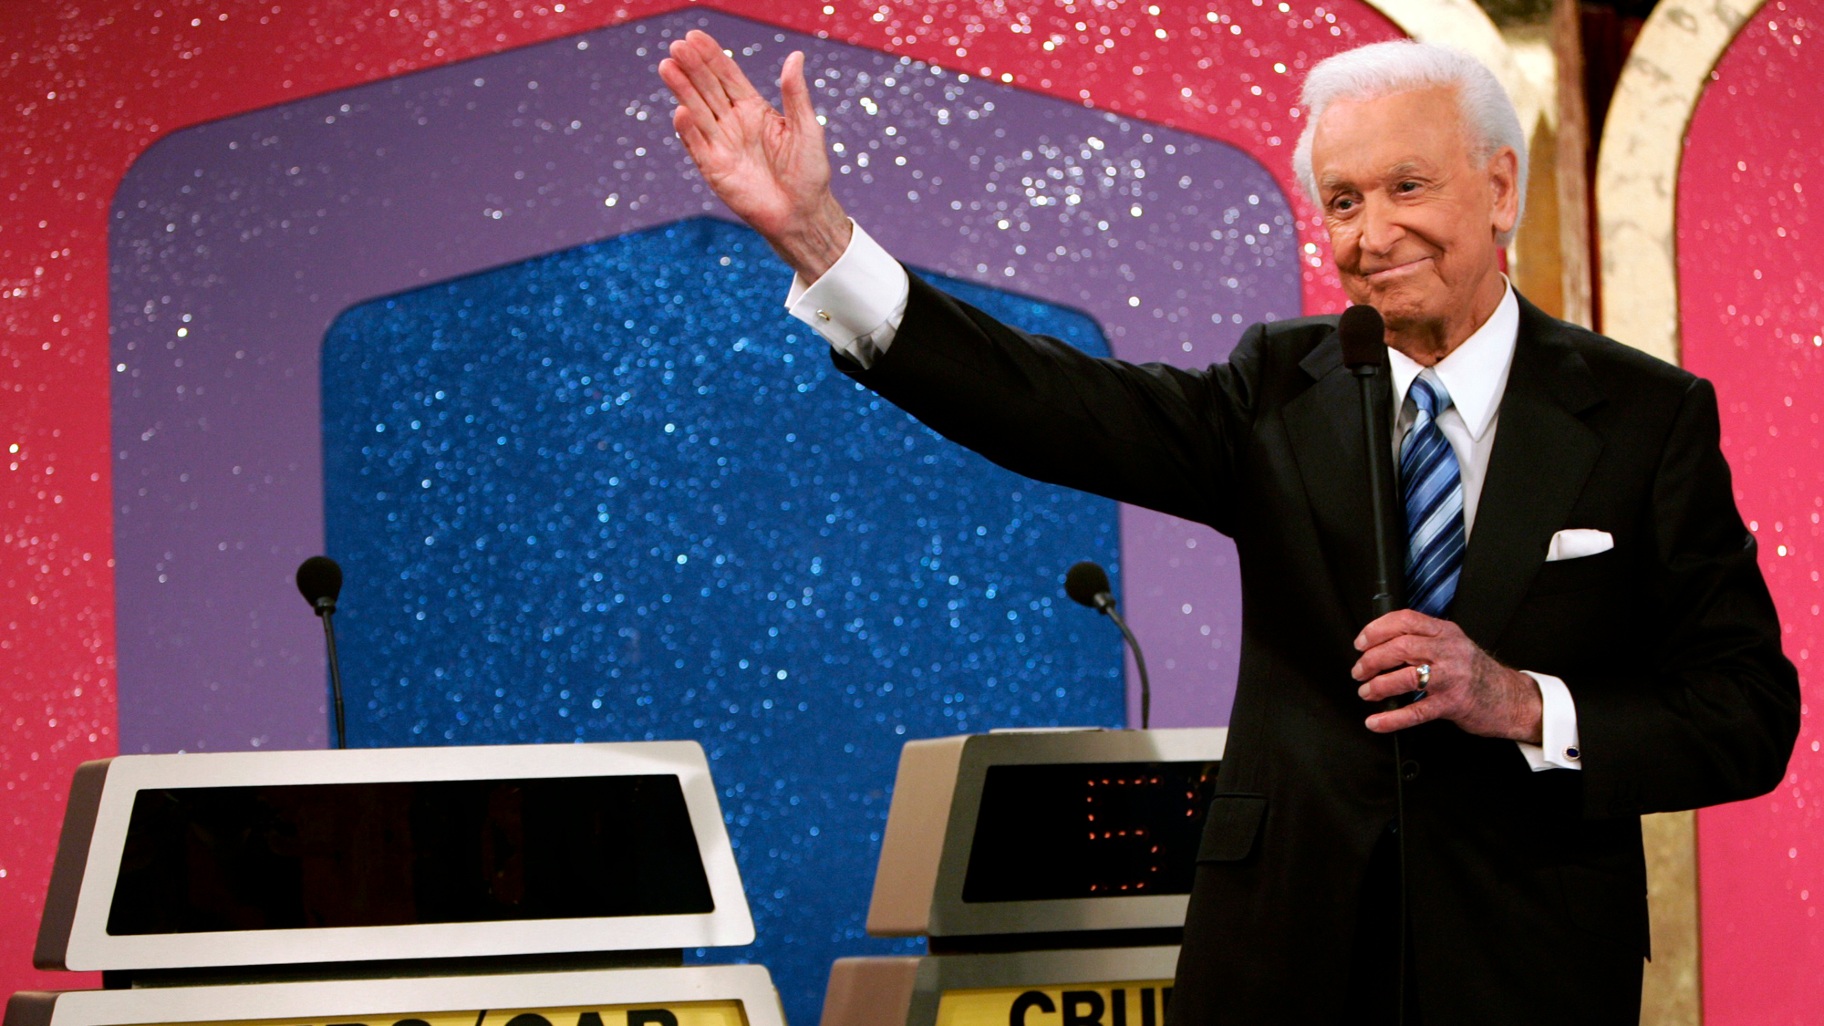 Bob Barker, Longtime The Price is Right Host, Dead at 99 Chicago News WTTW